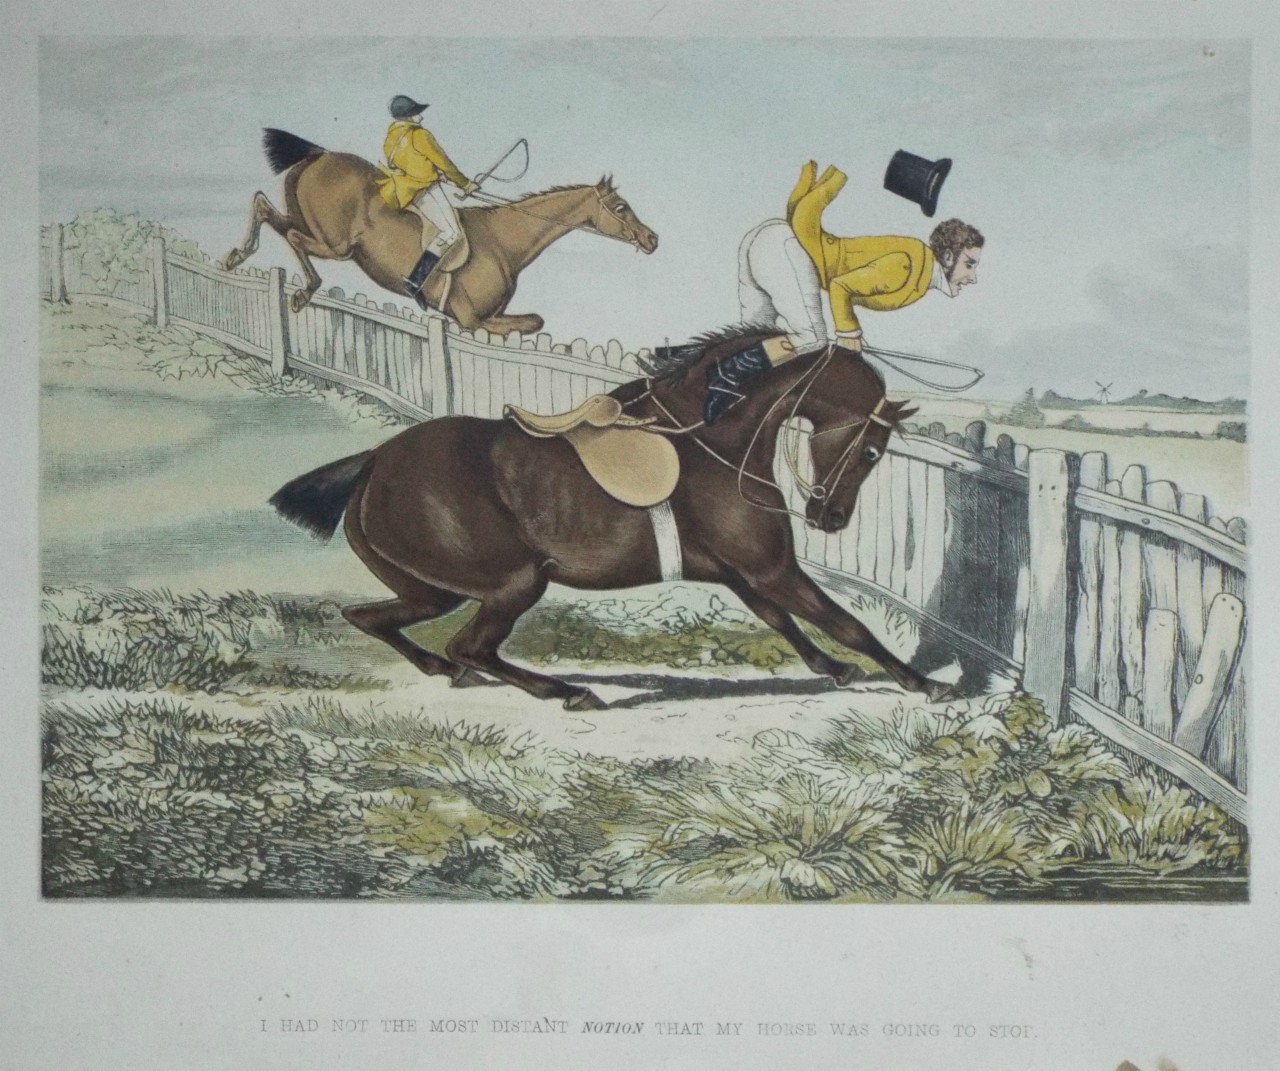 Chromo-lithograph - I had not the most distant Notion that my horse was going to stop.